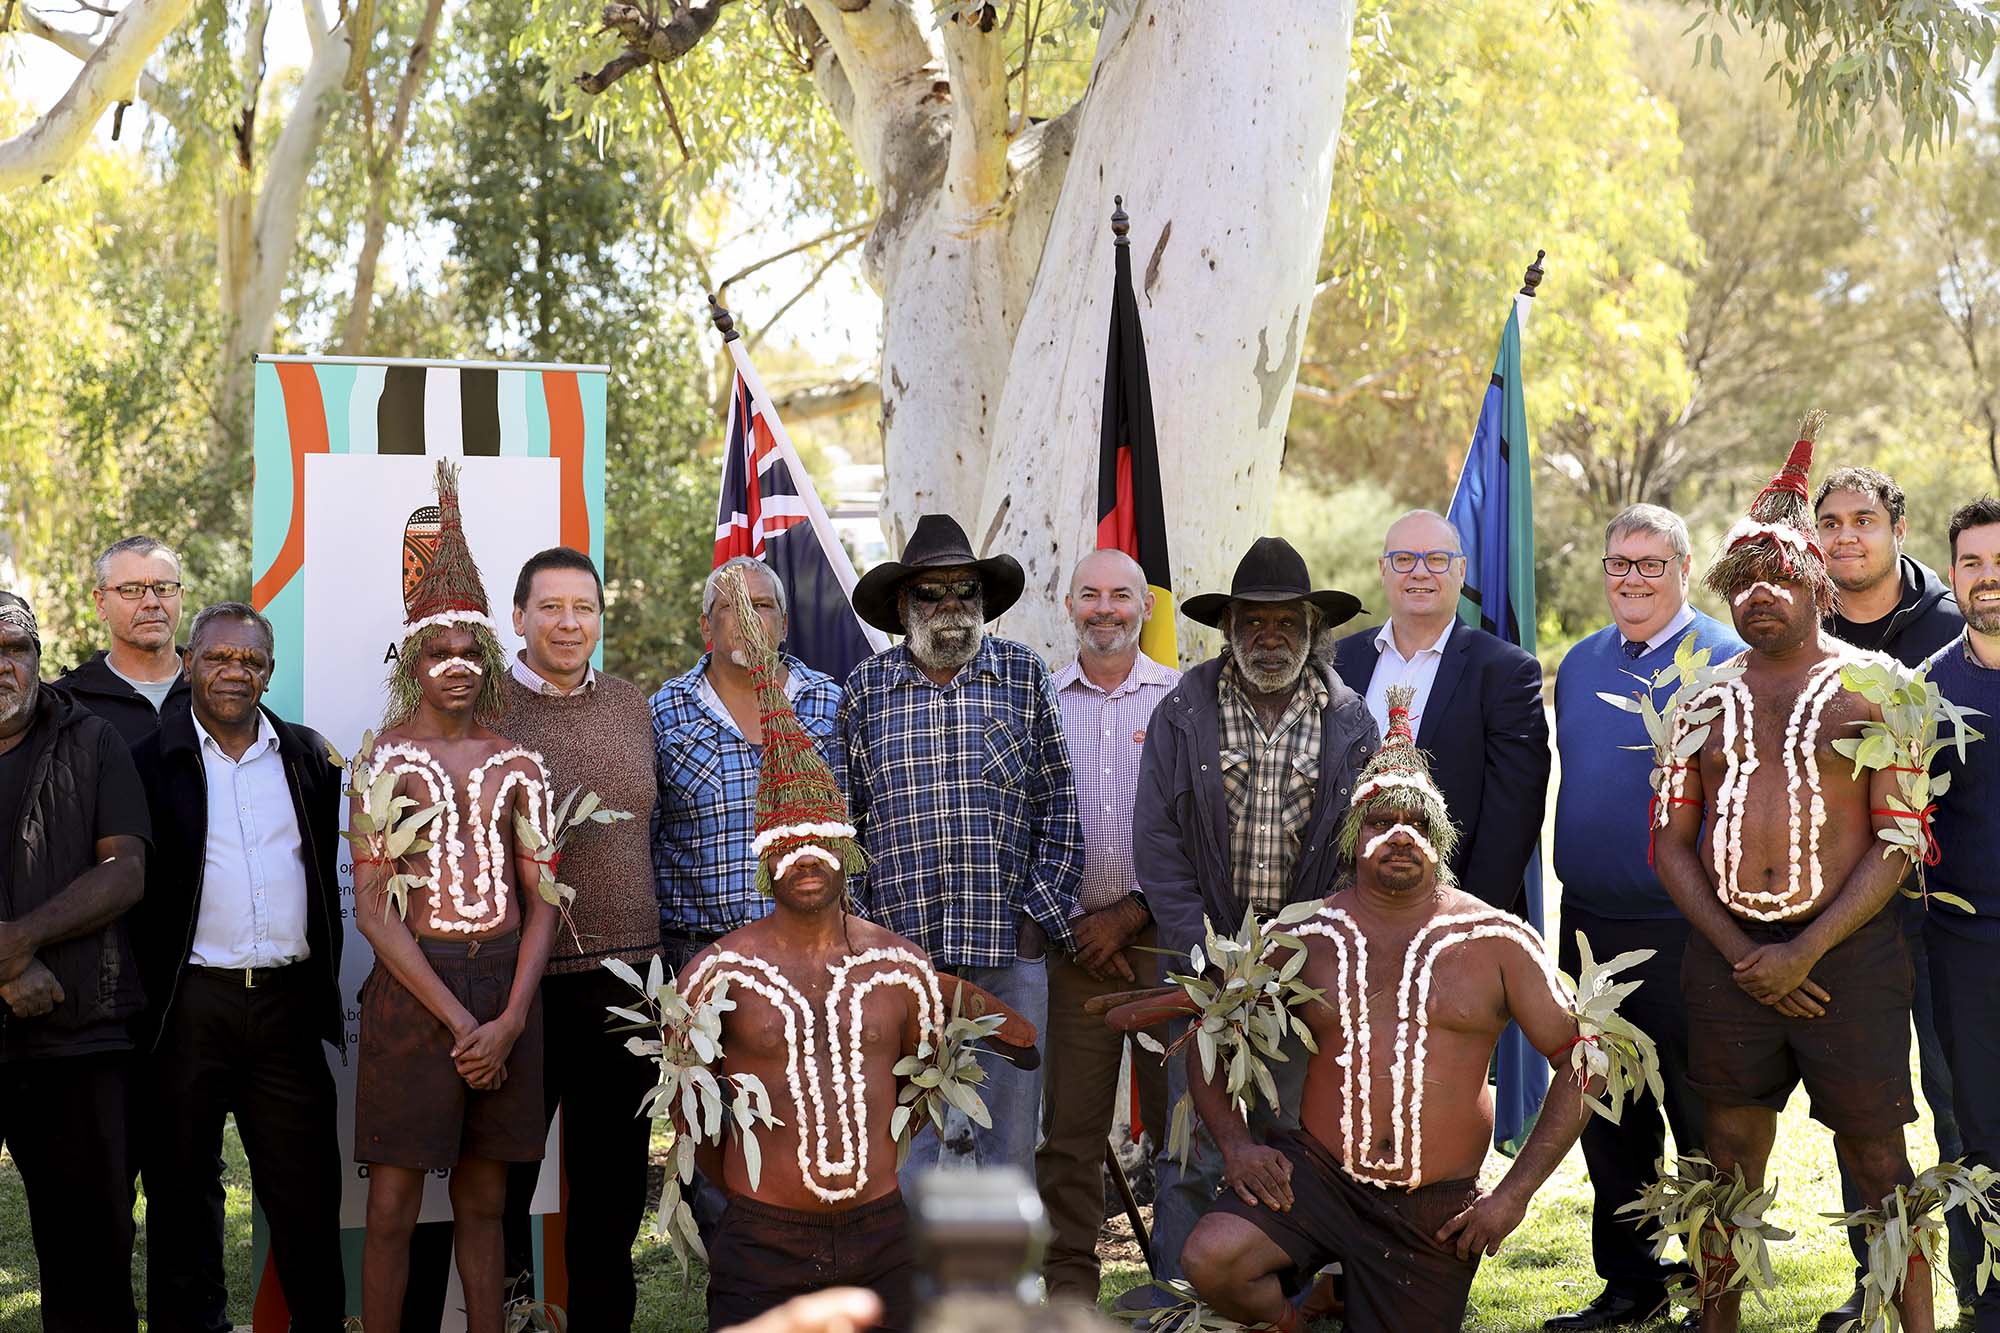 Group photo with people dressed in authentic Aboriginal dress